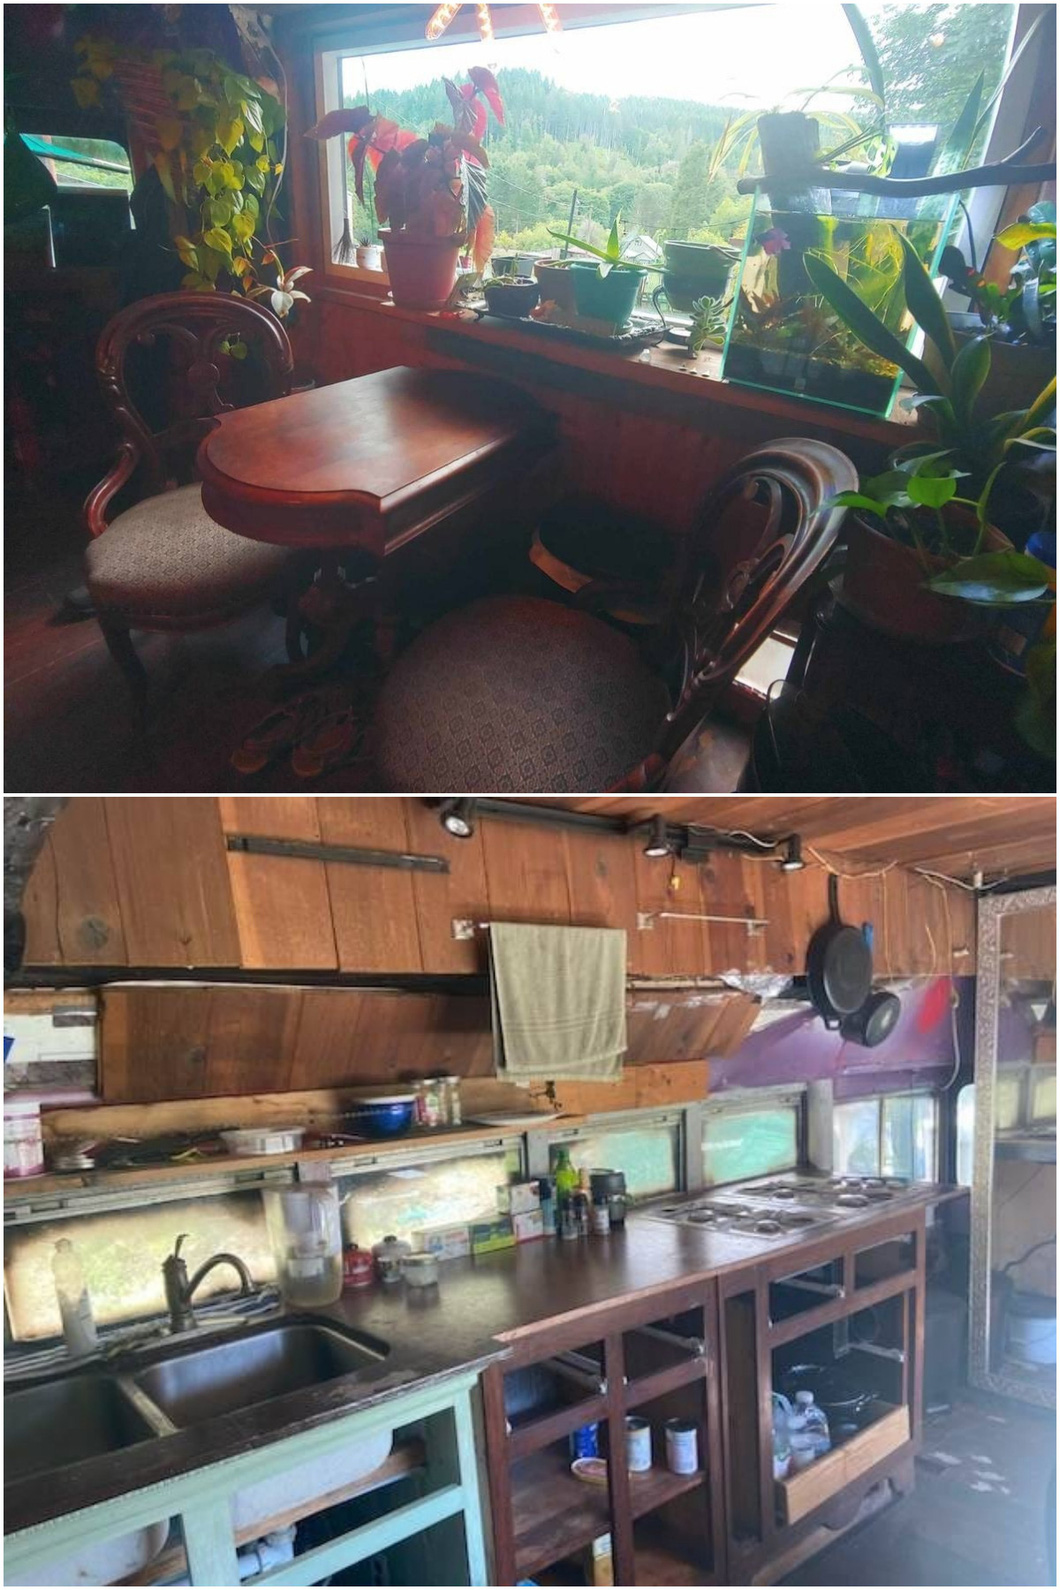 The kitchen is quite comfortable with ample stove, food preparation table, sink with electric heater.  The dining table is placed near a window with plenty of light, surrounded by lots of cool plants - Photo: Craigslist